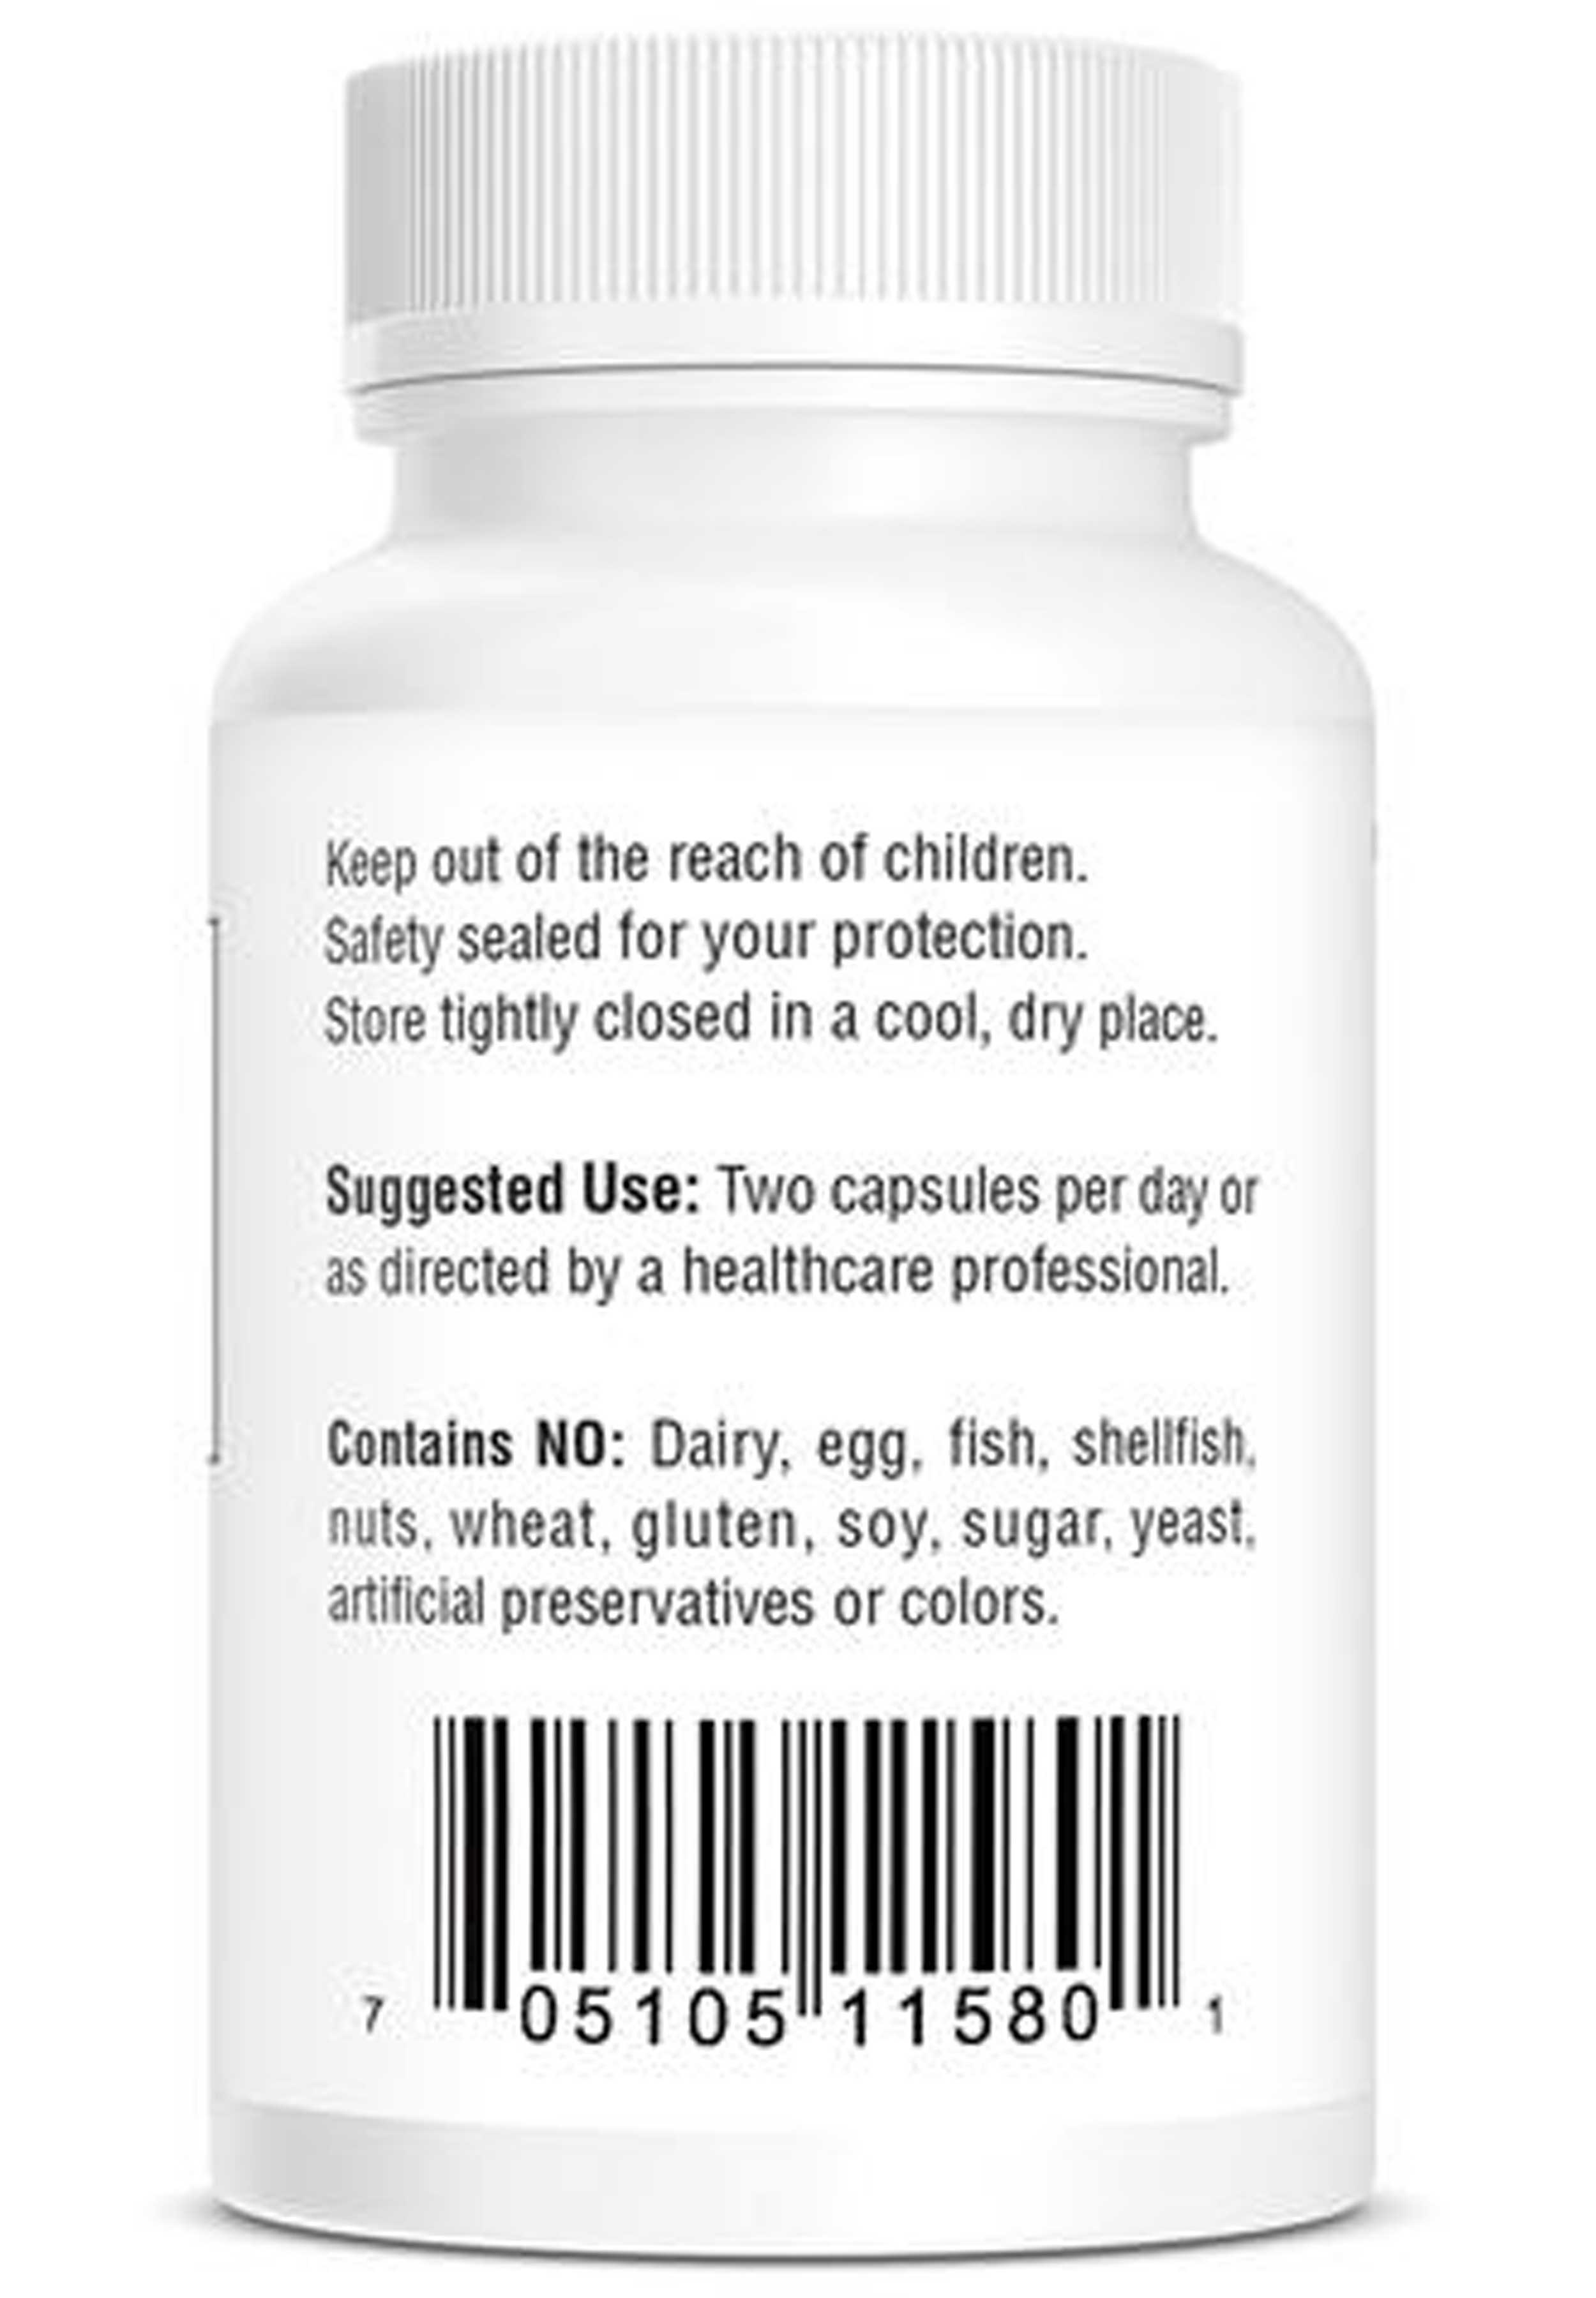 Bio-Tech Pharmacal Magnesium Citrate Ingredients